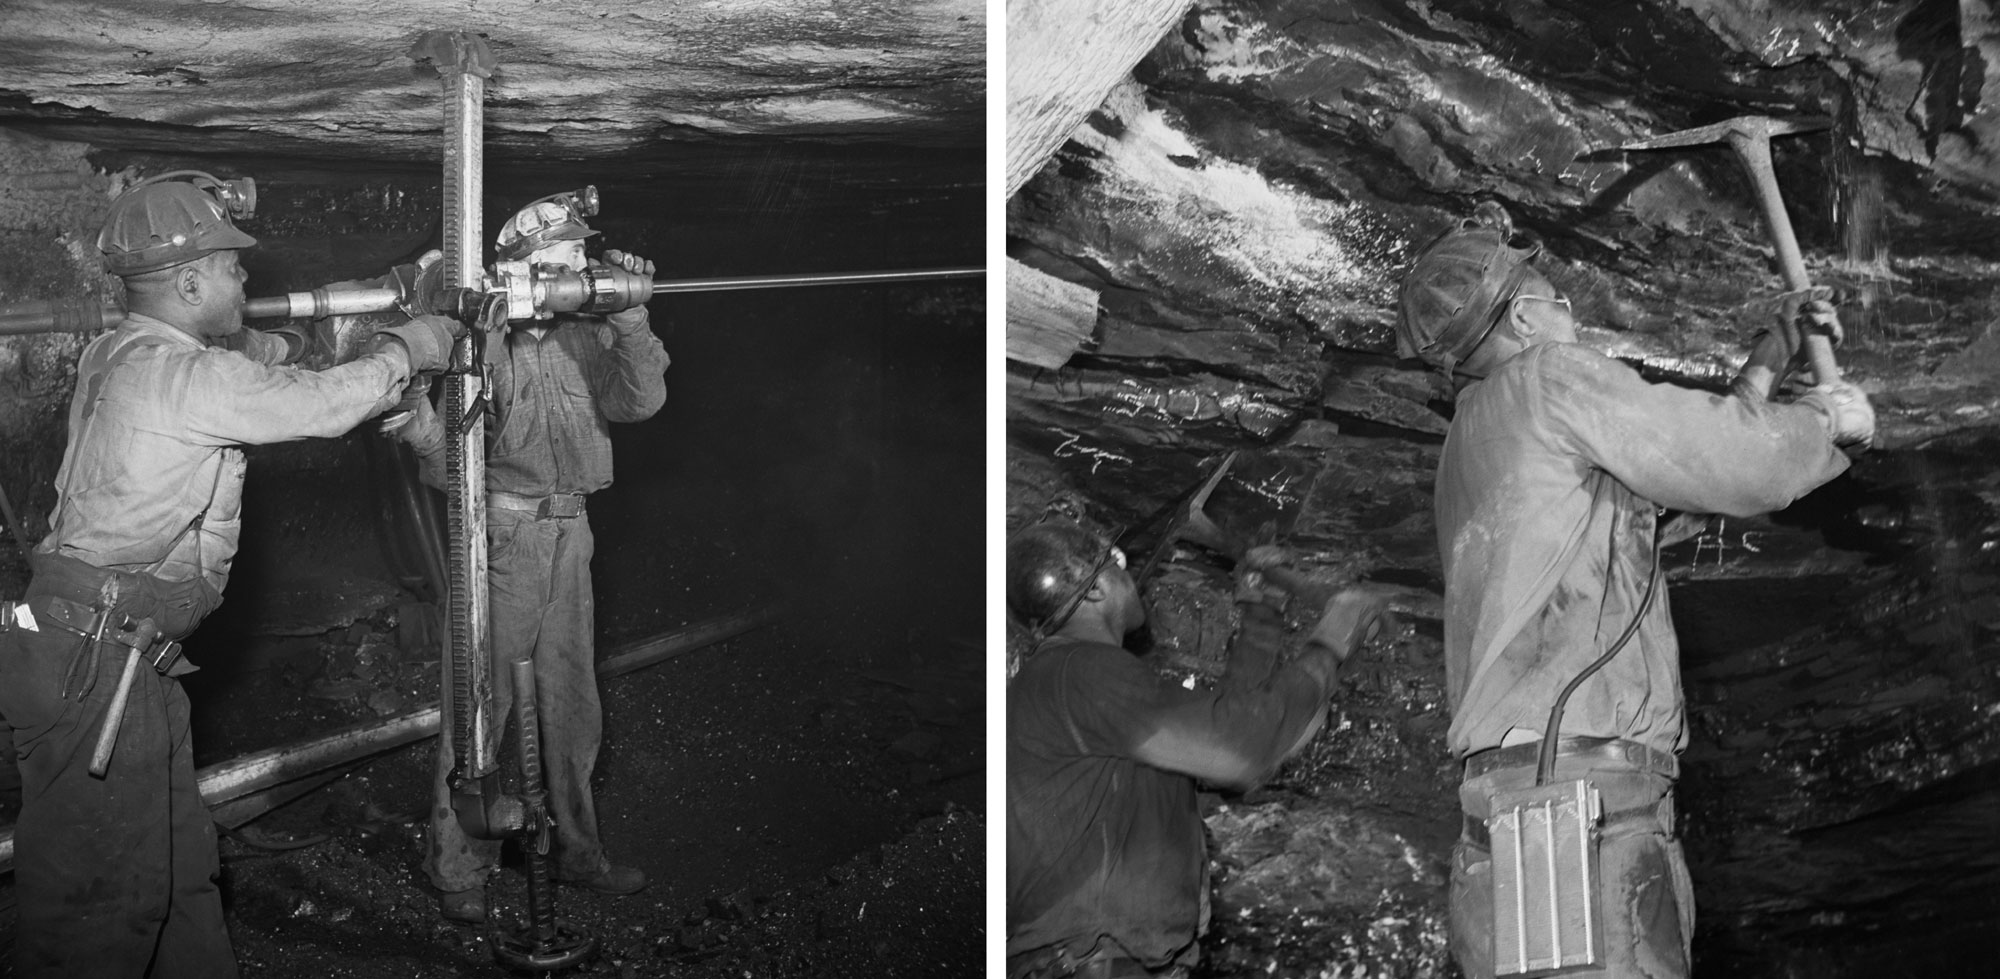 2-panel image showing black and white photographs of coal miners working in an underground mine in 1942. Panel 1: Two men operating a drill. The drill consists of a vertical beam running floor to ceiling in a mineshaft, with a long, horizontal bit extending toward the right side of the image. One man stands of the far side of the drill and one behind it on the near side. Both appear to be using their hands to operate or guide it. Panel 2: Two men using picks to remove rock from the ceiling of a mine shaft. Both men are wearing long-sleeved shirts, pants, and hard hats with lamps on the front. 